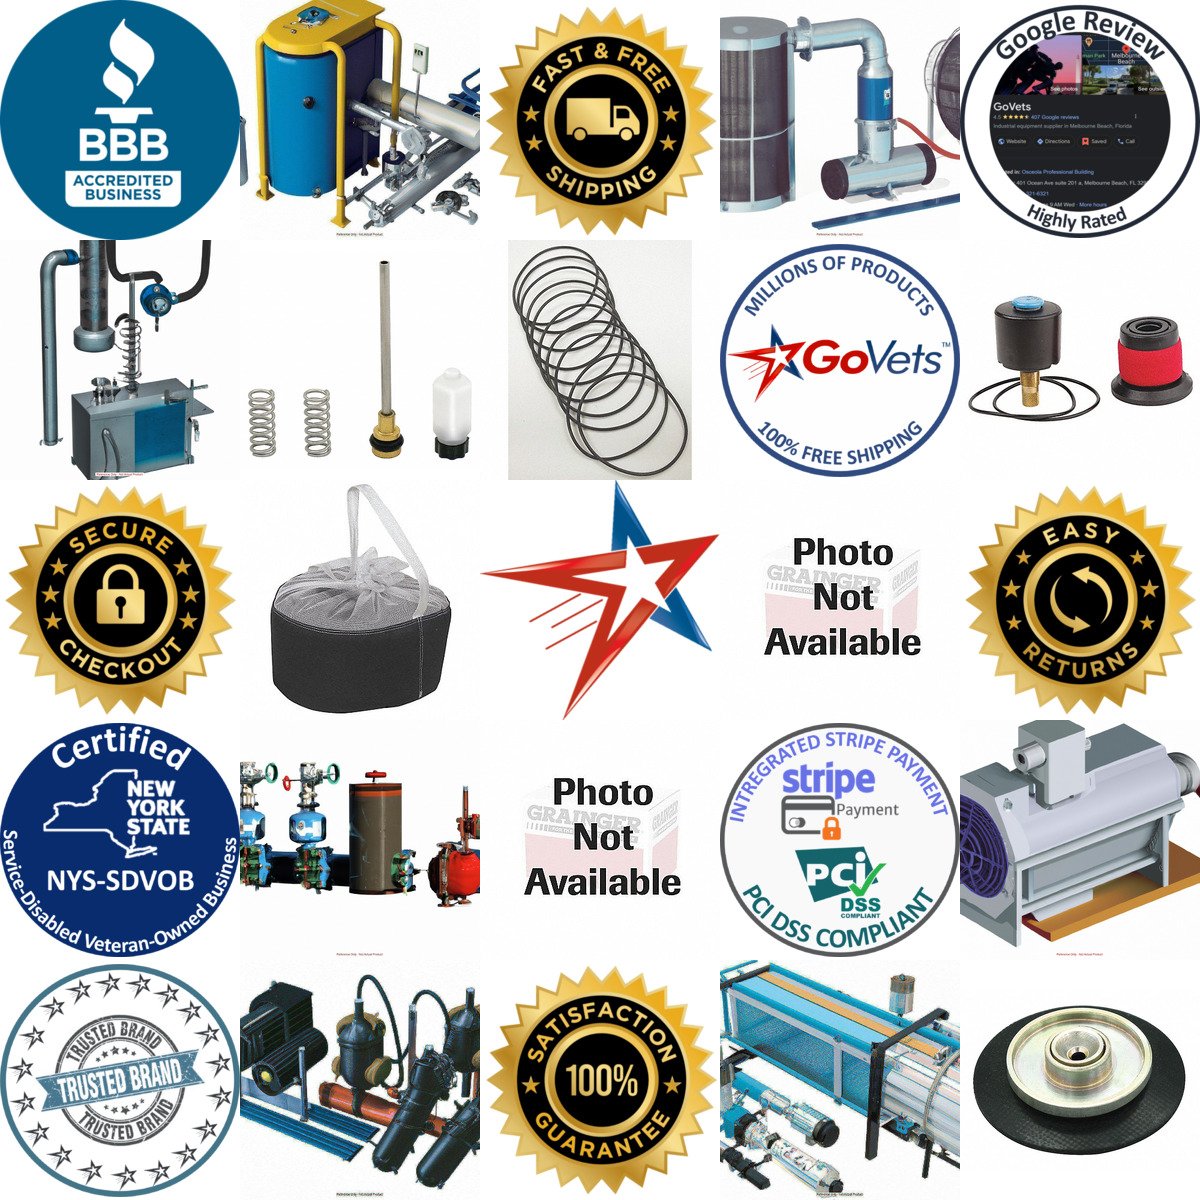 A selection of Air Treatment Replacement Parts products on GoVets